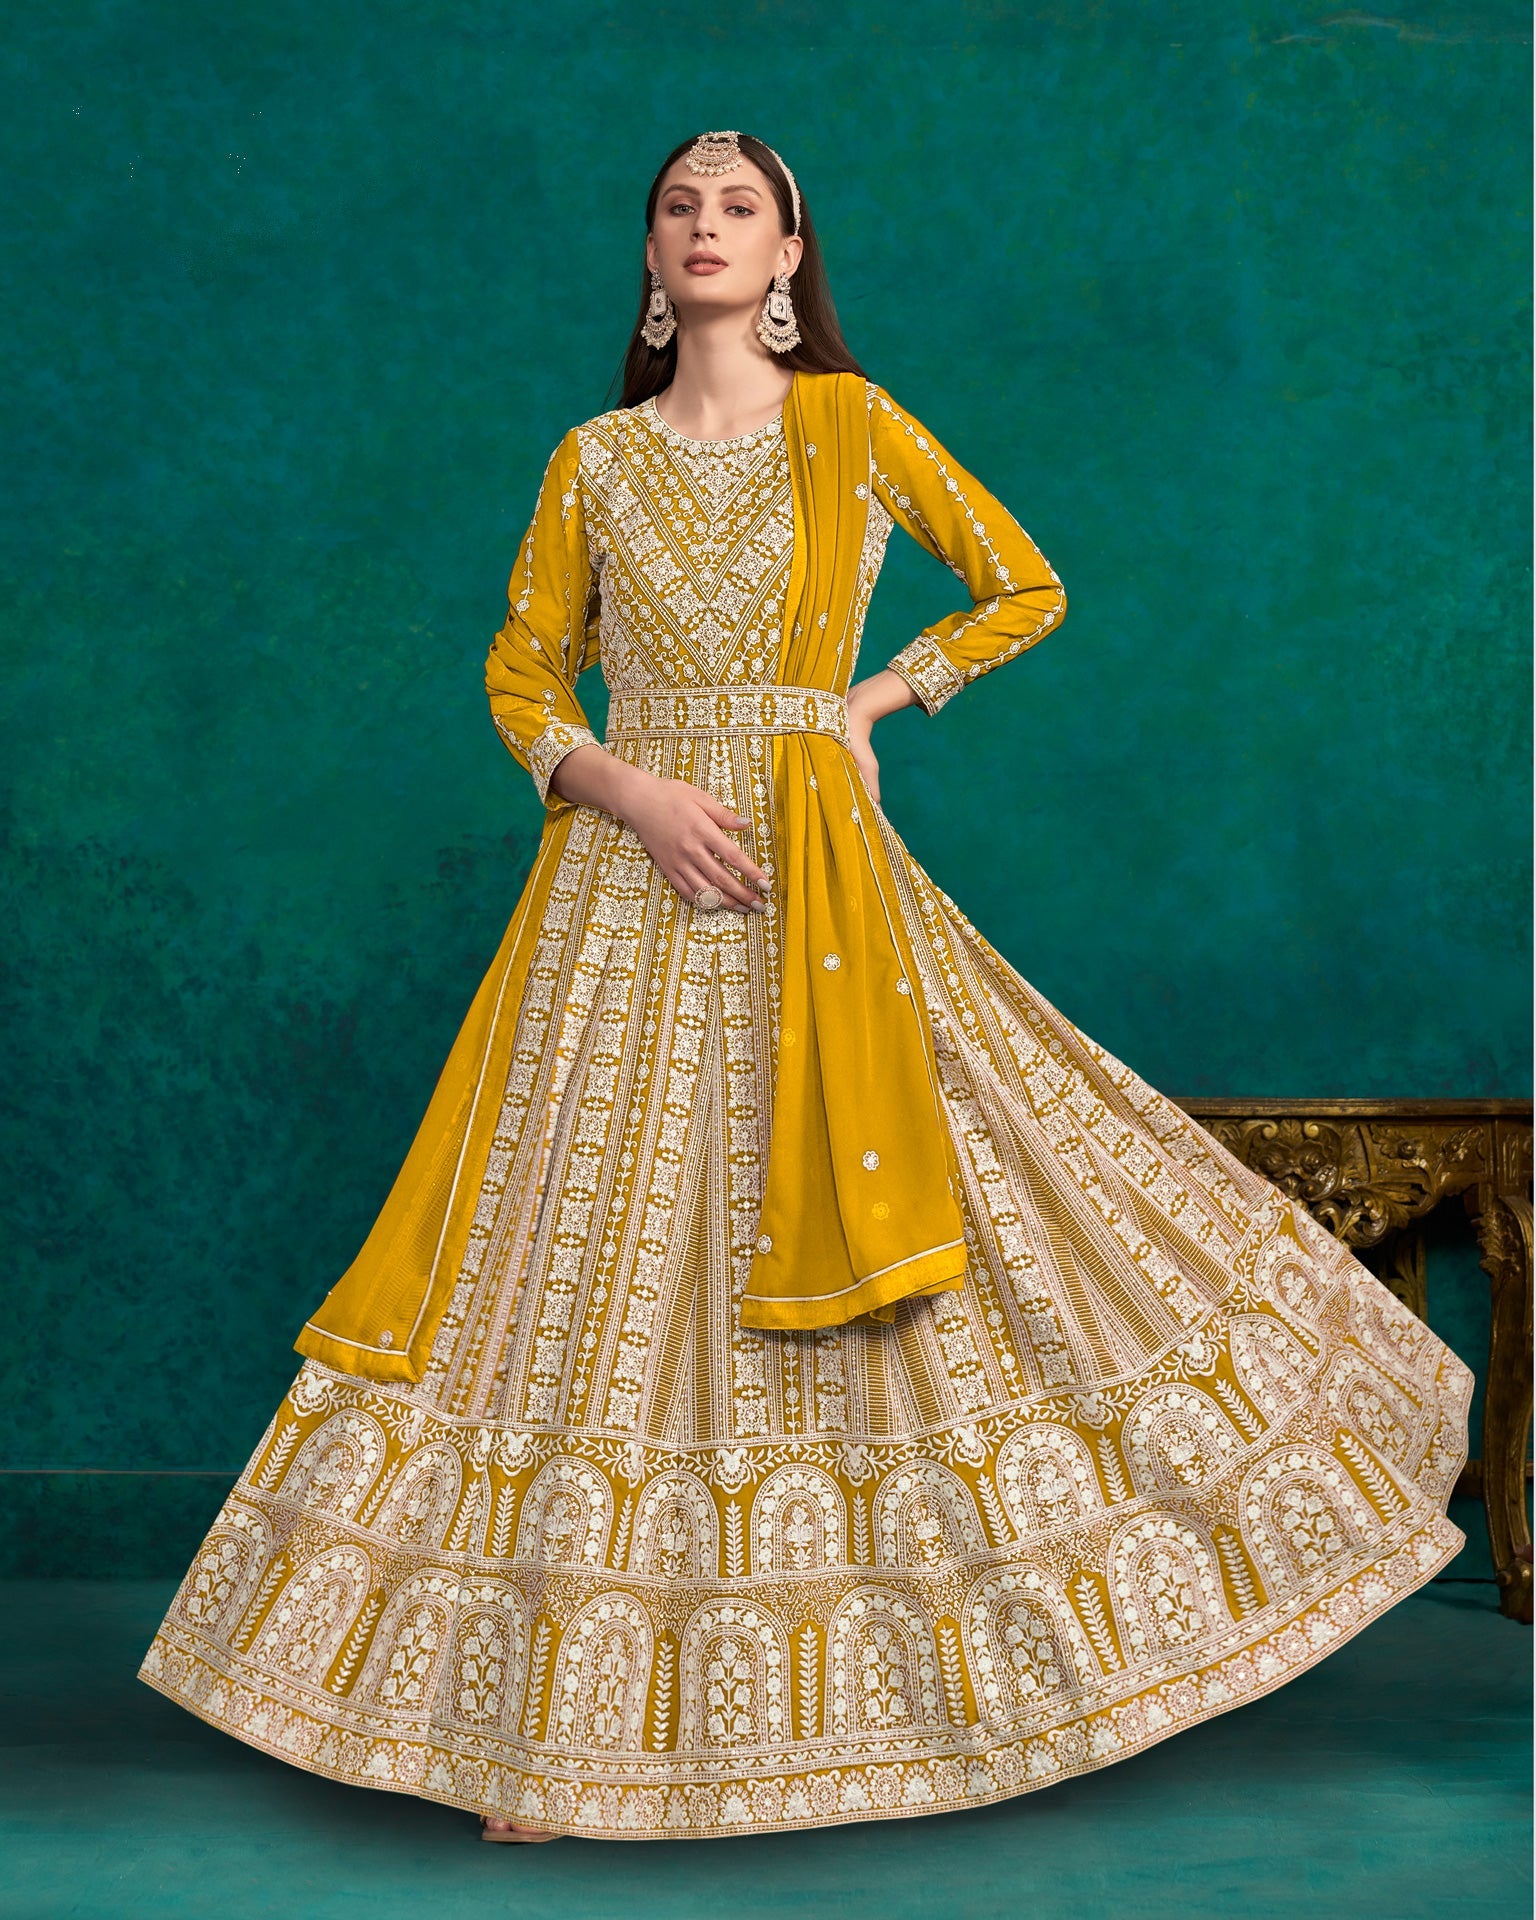 Yellow Thread Work Faux Georgette Anarkali Suit With Yellow Embroidered Dupatta